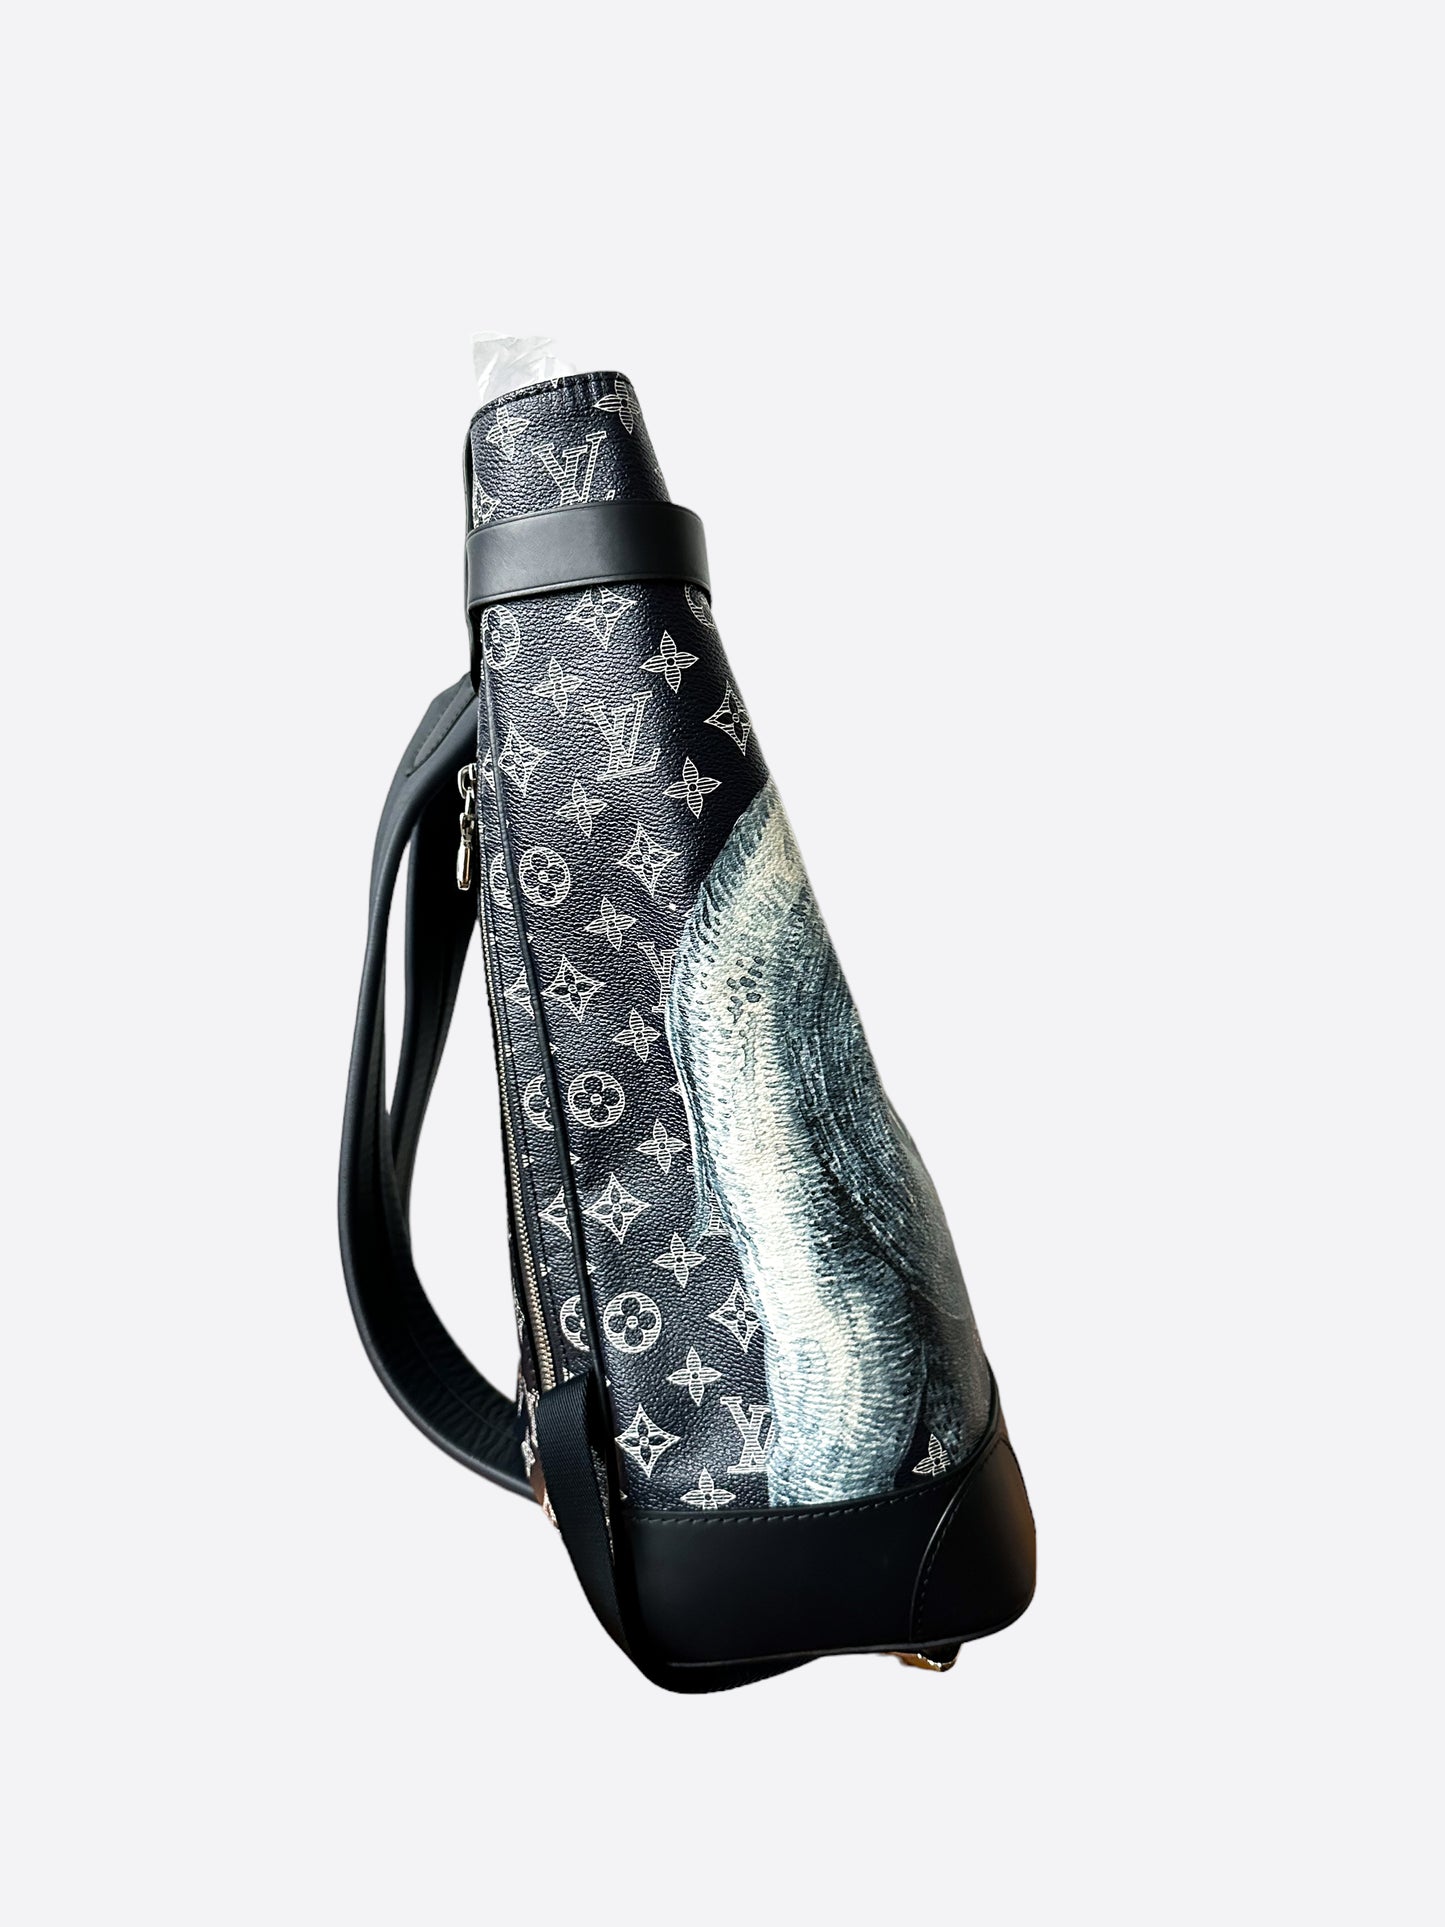 Louis Vuitton X Chapman Brothers Reveal #3 * Steamer Backpack